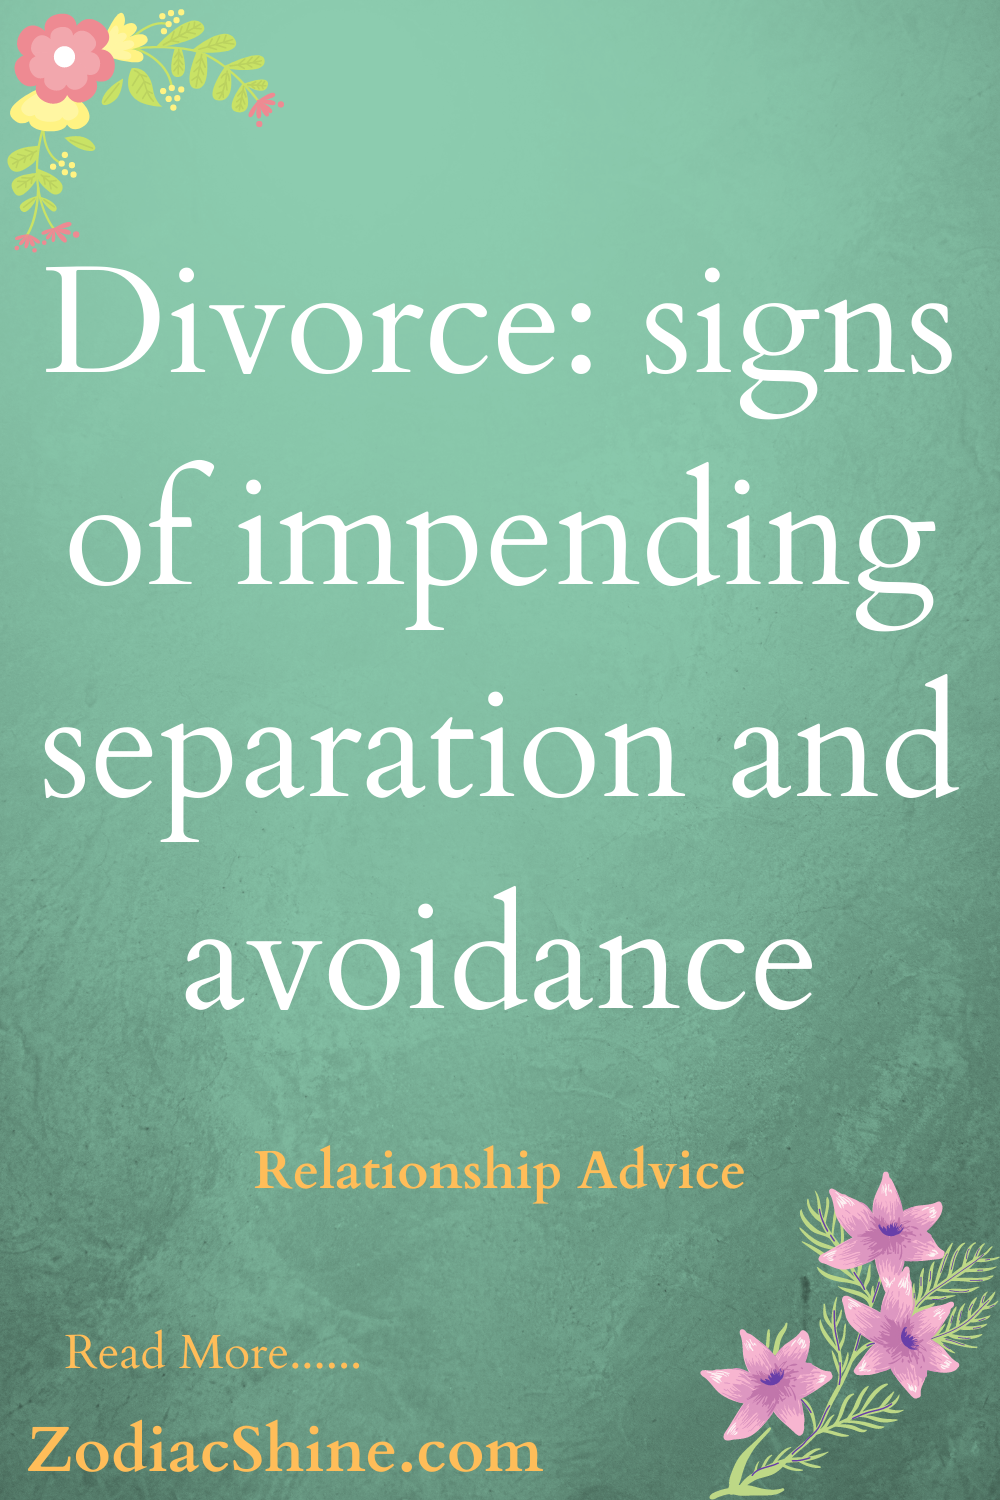 Divorce: signs of impending separation and avoidance